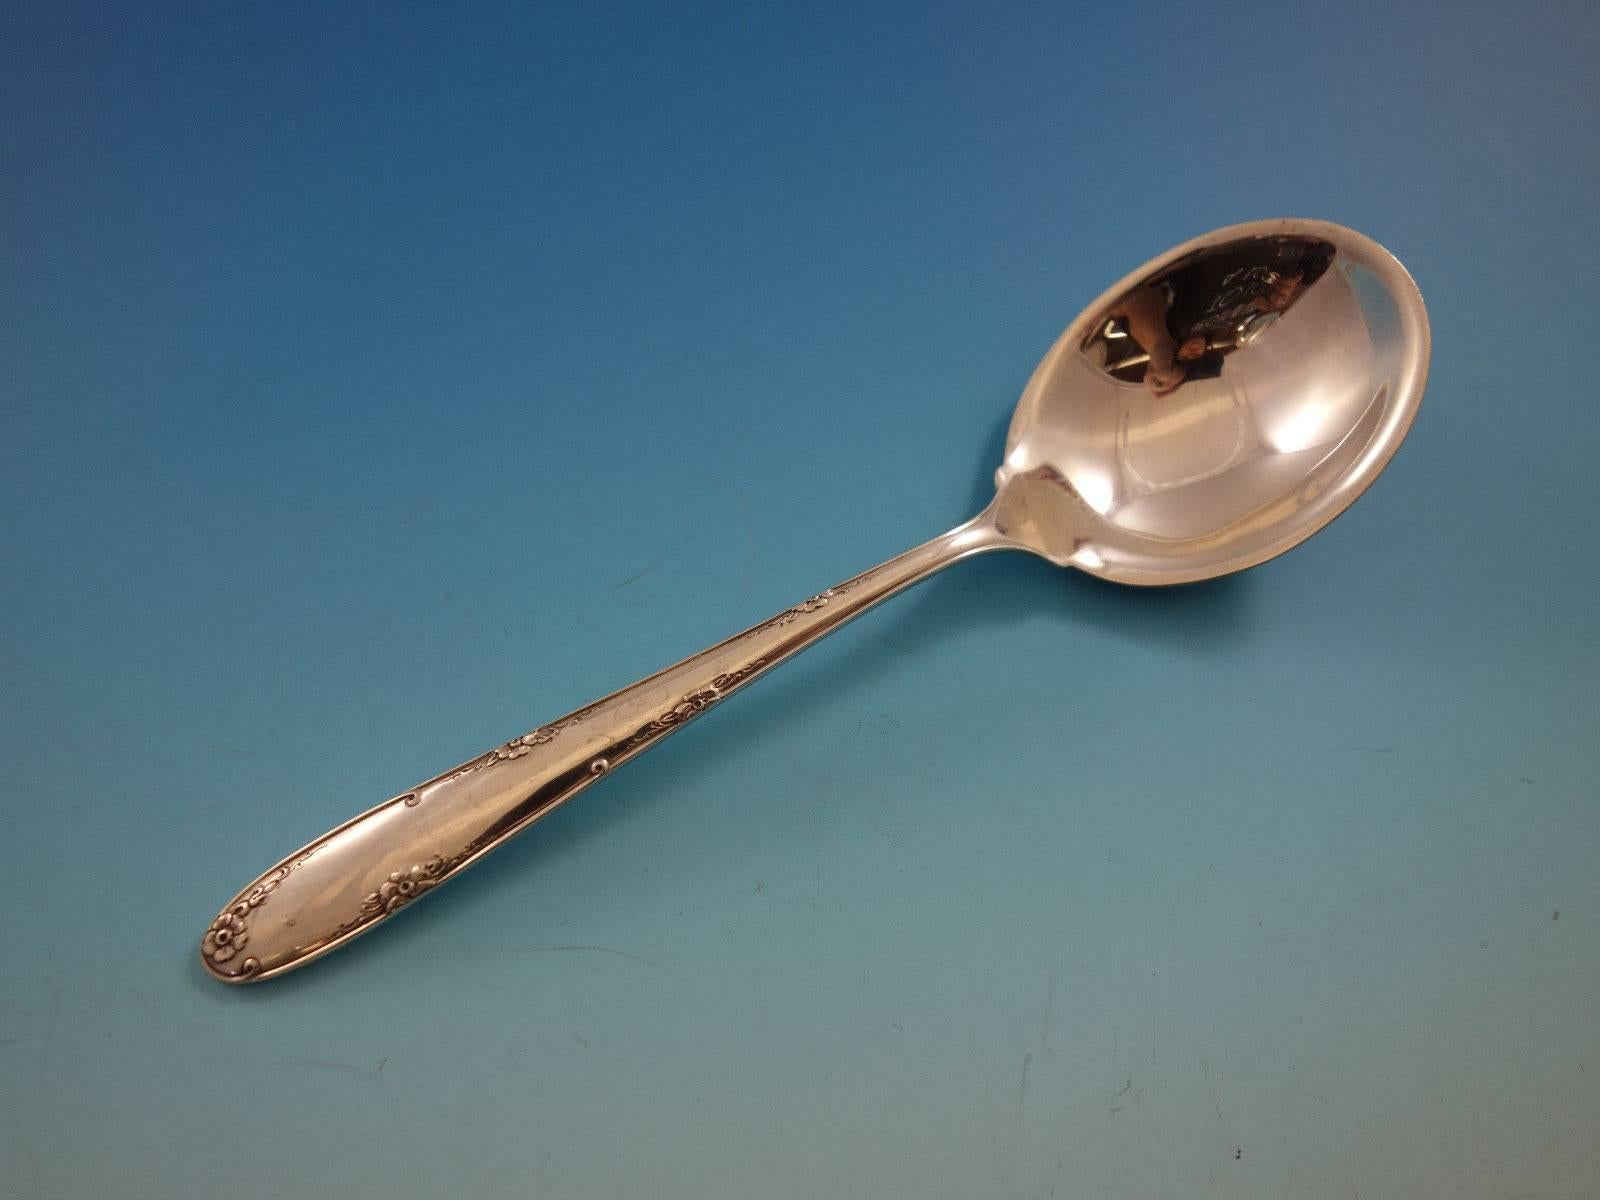 TOWLE MADEIRA STERLING SILVER CREAM SOUP SPOON EXCELLENT CONDITION 